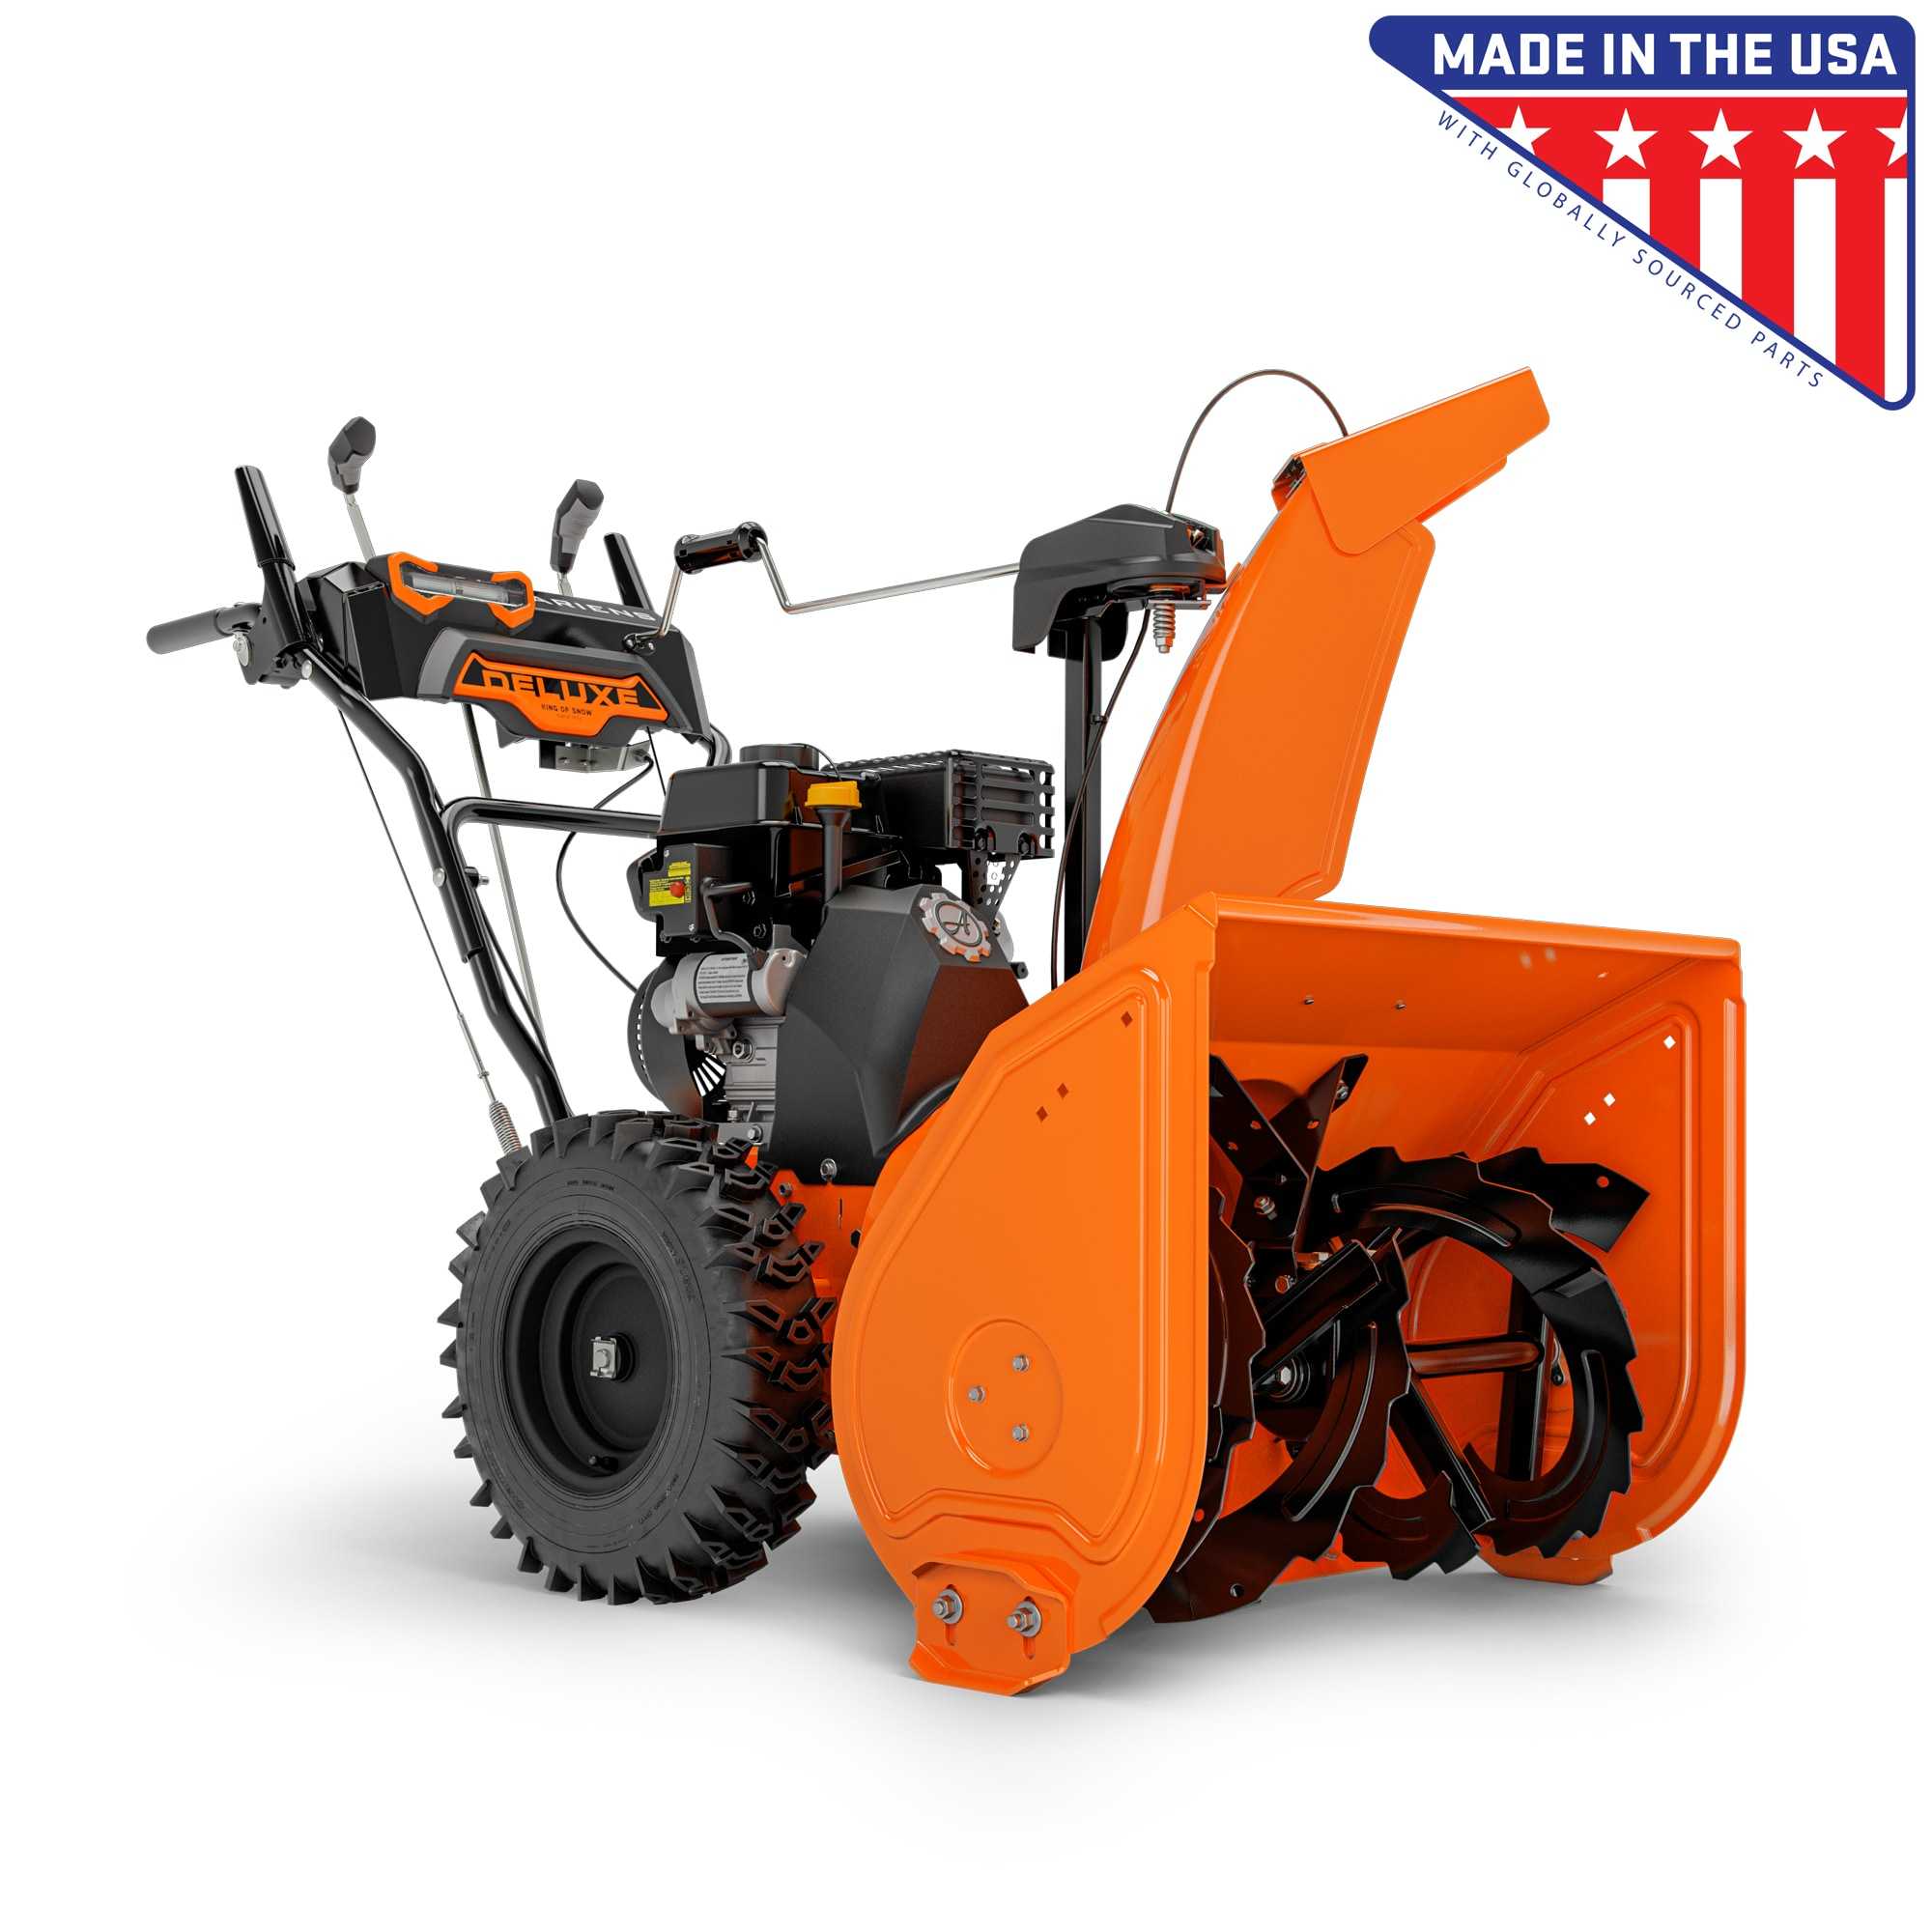 Ariens Deluxe 28-in Two-stage Self-propelled Gas Snow Blower in Orange | 921046